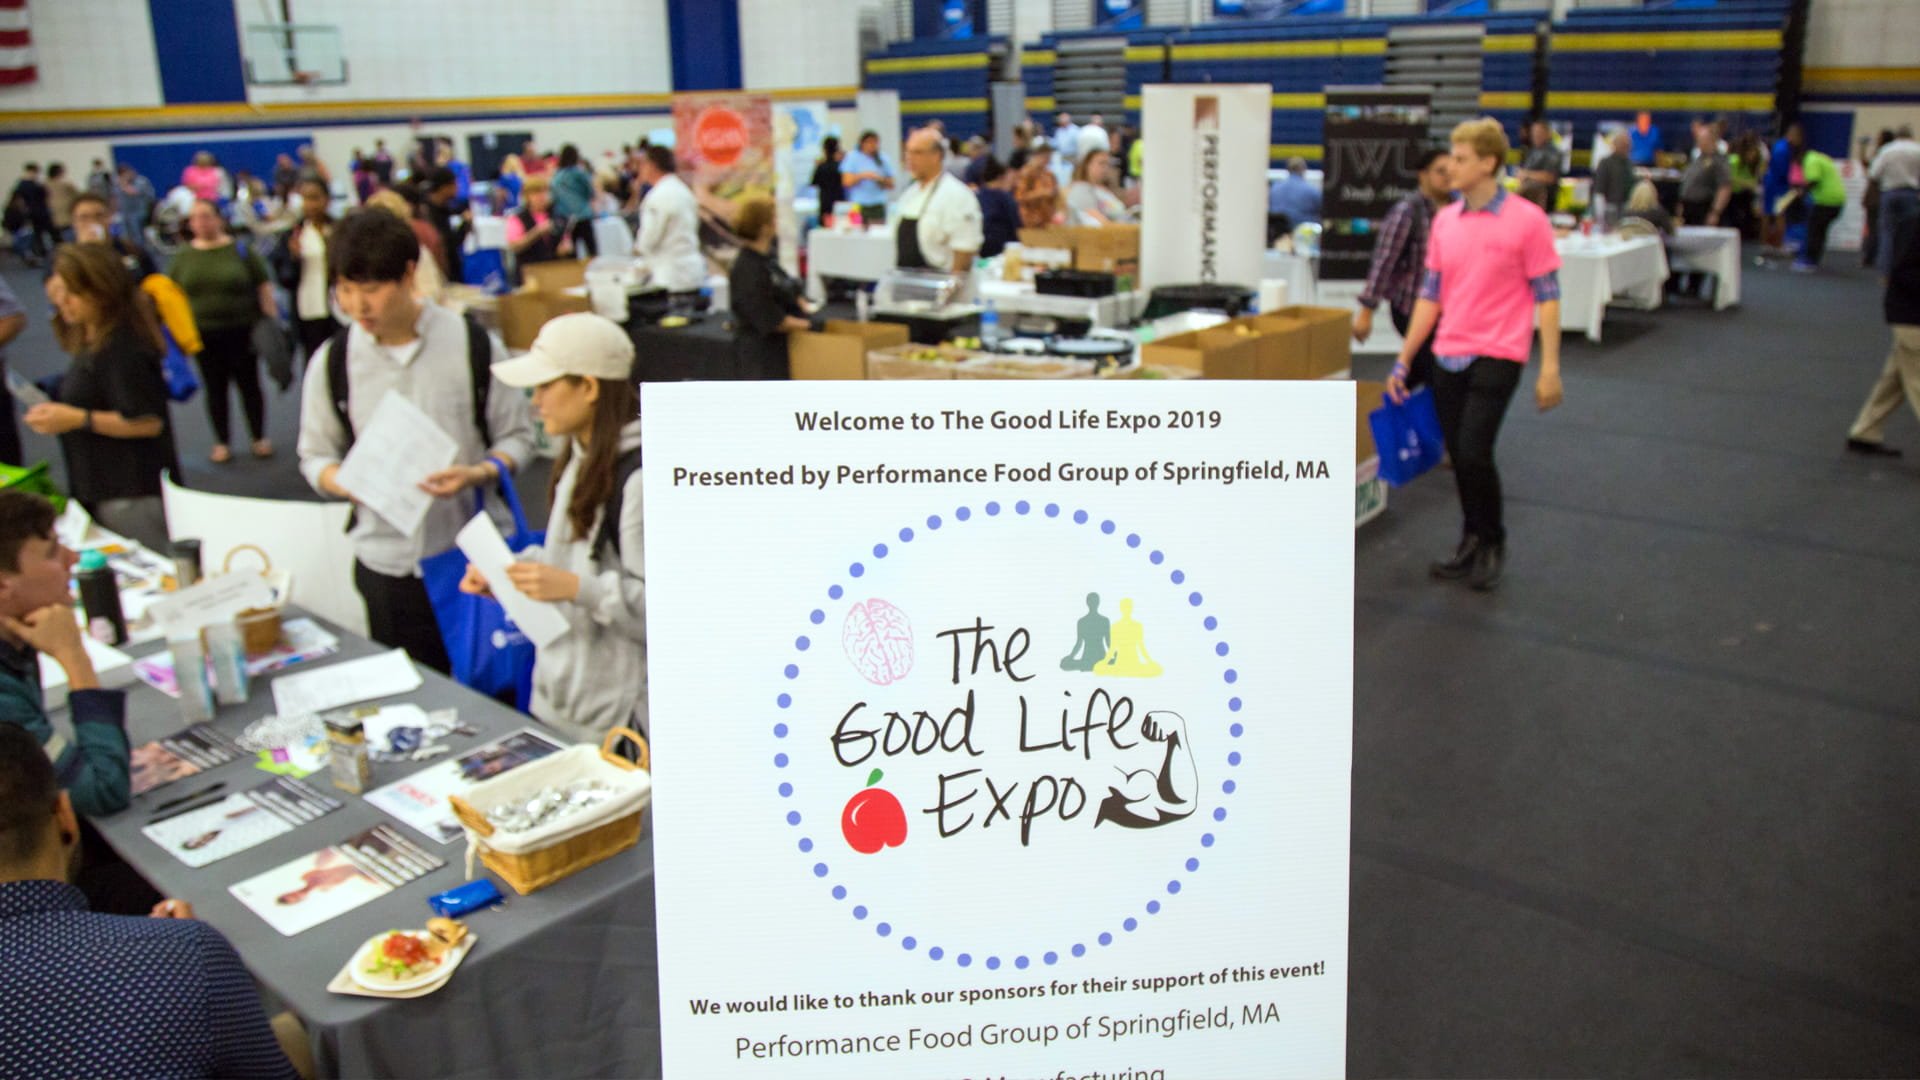 Welcome to the Good Life Expo at JWU.